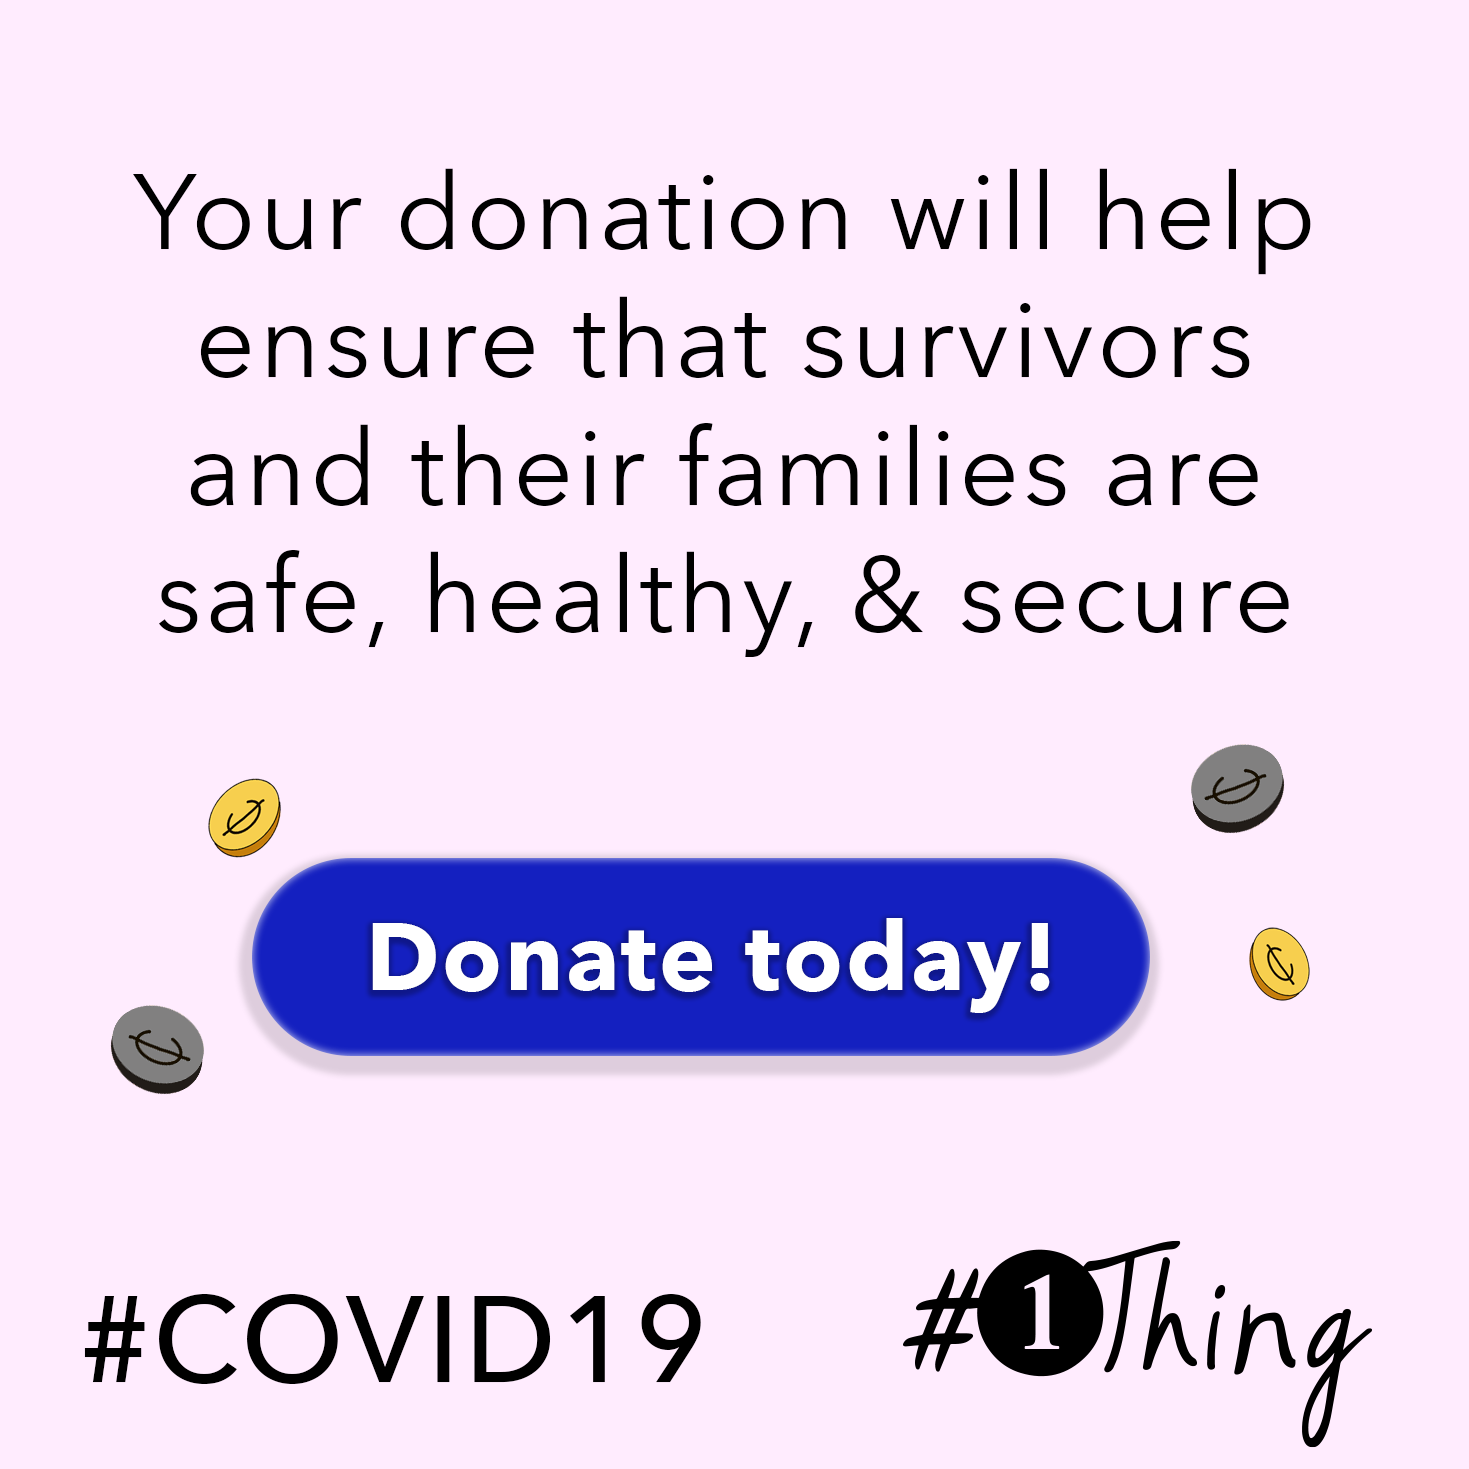 Your donation will help ensure that survivors and their families are safe, healthy, & secure